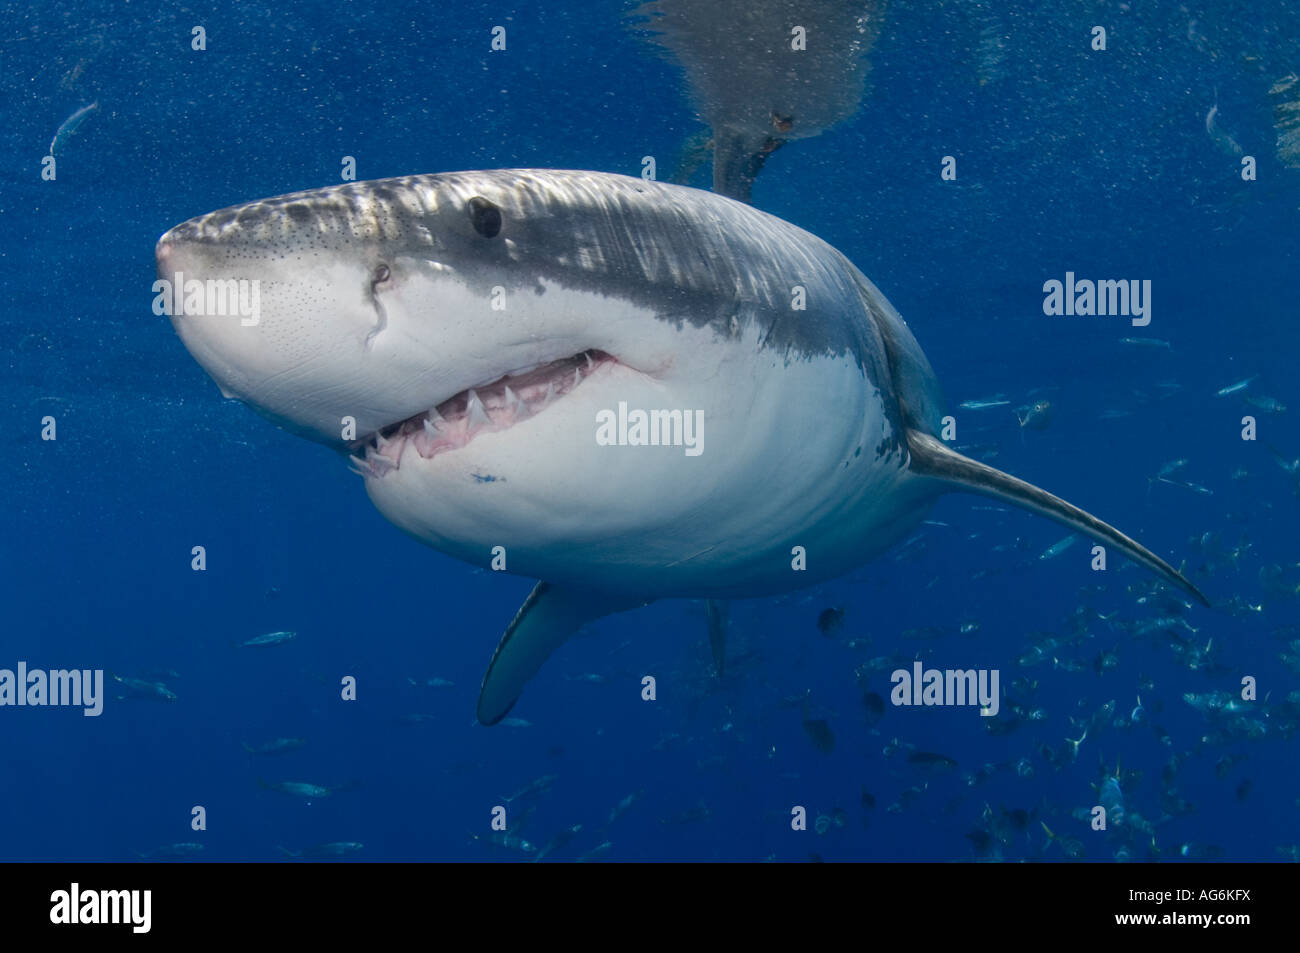 Great White Shark (Carcharodon carcharias) photographed in Guadalupe Island, Mexico. Stock Photo